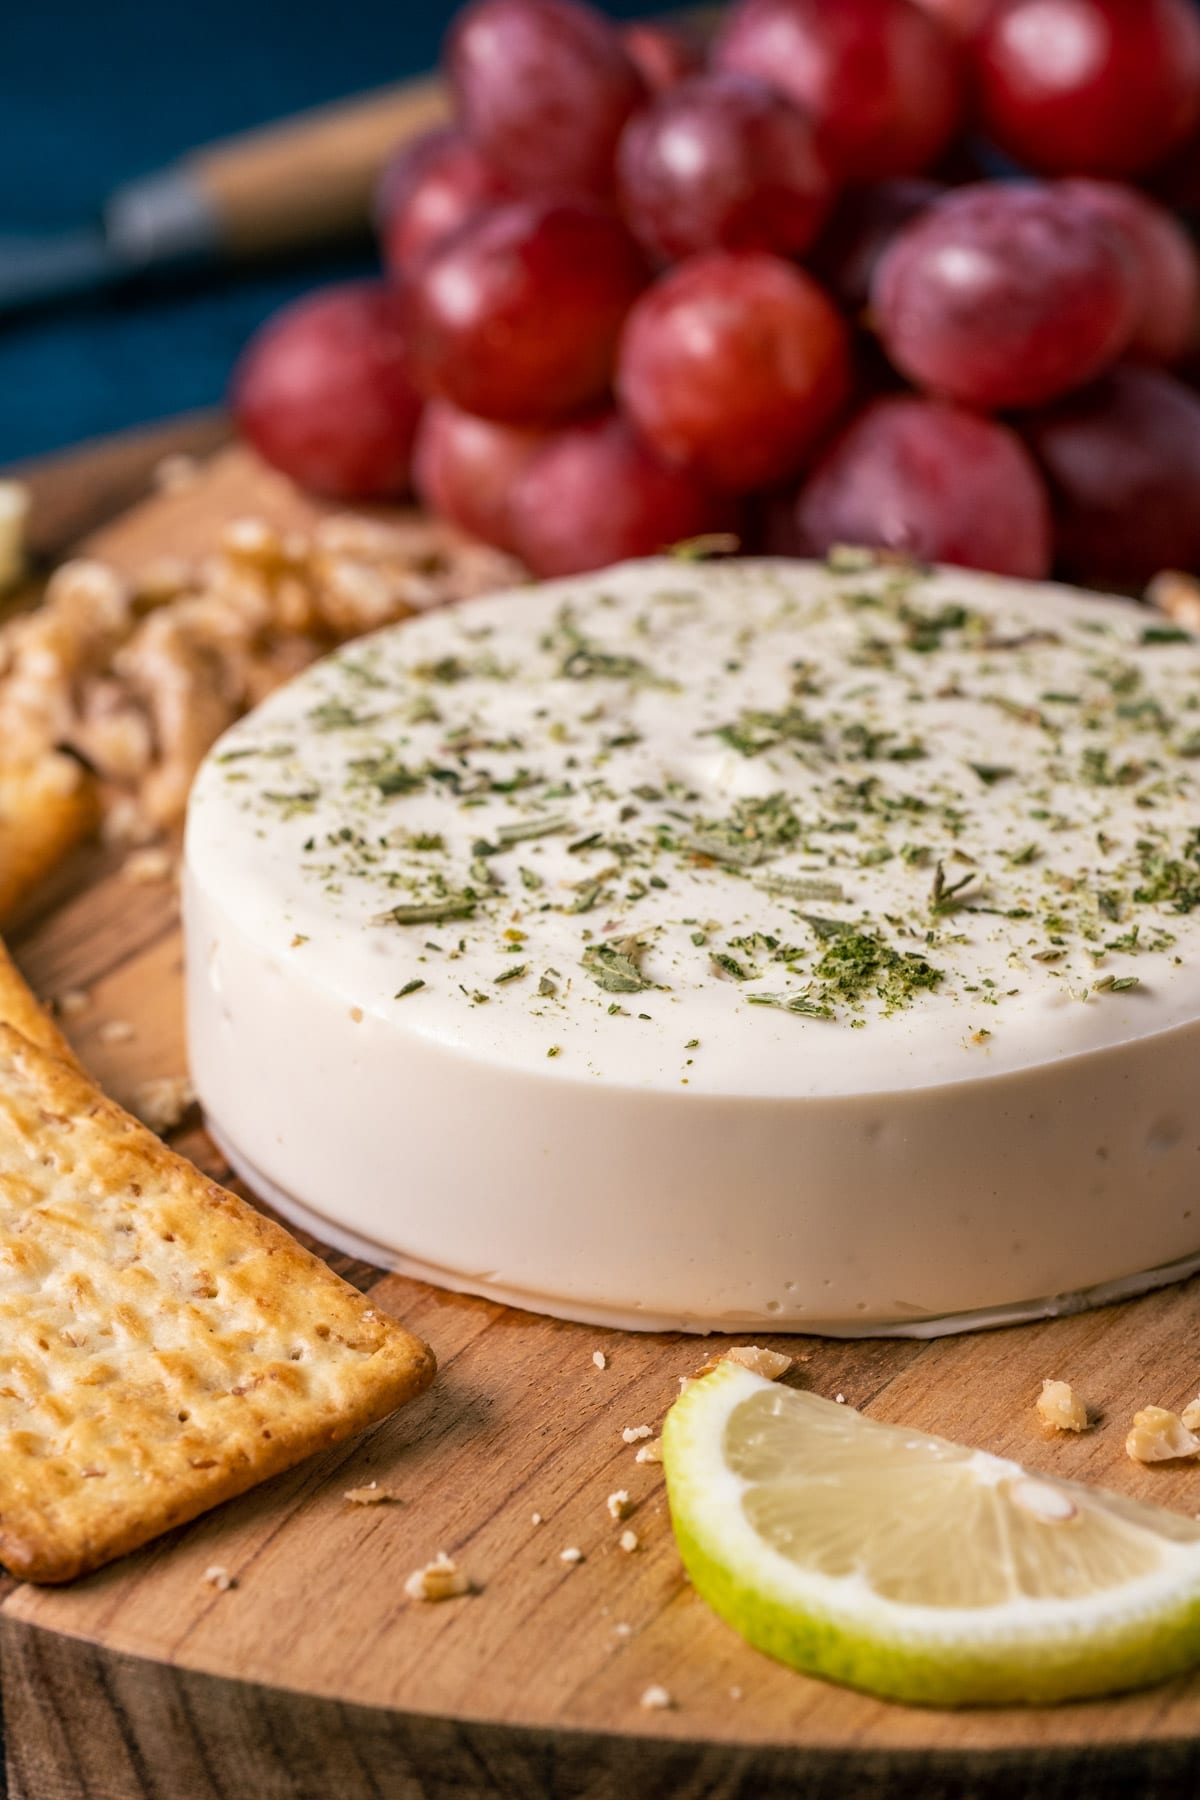 Vegan goat cheese on a wooden board with crackers, nuts and grapes.